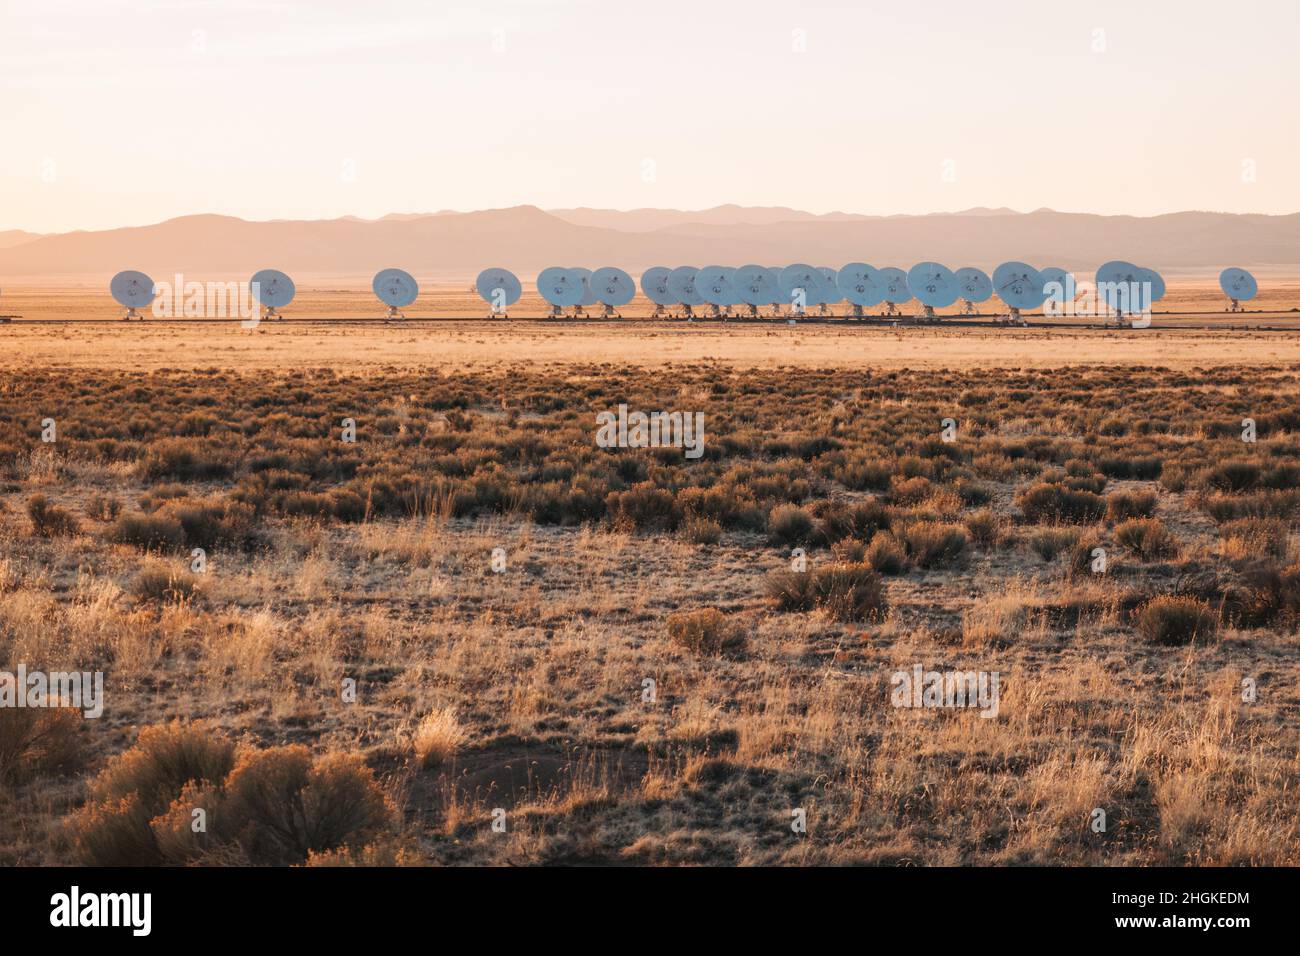 Radio telescope dishes stacked together at the Karl G. Jansky Very Large Array on the Plains of San Agustin, New Mexico Stock Photo